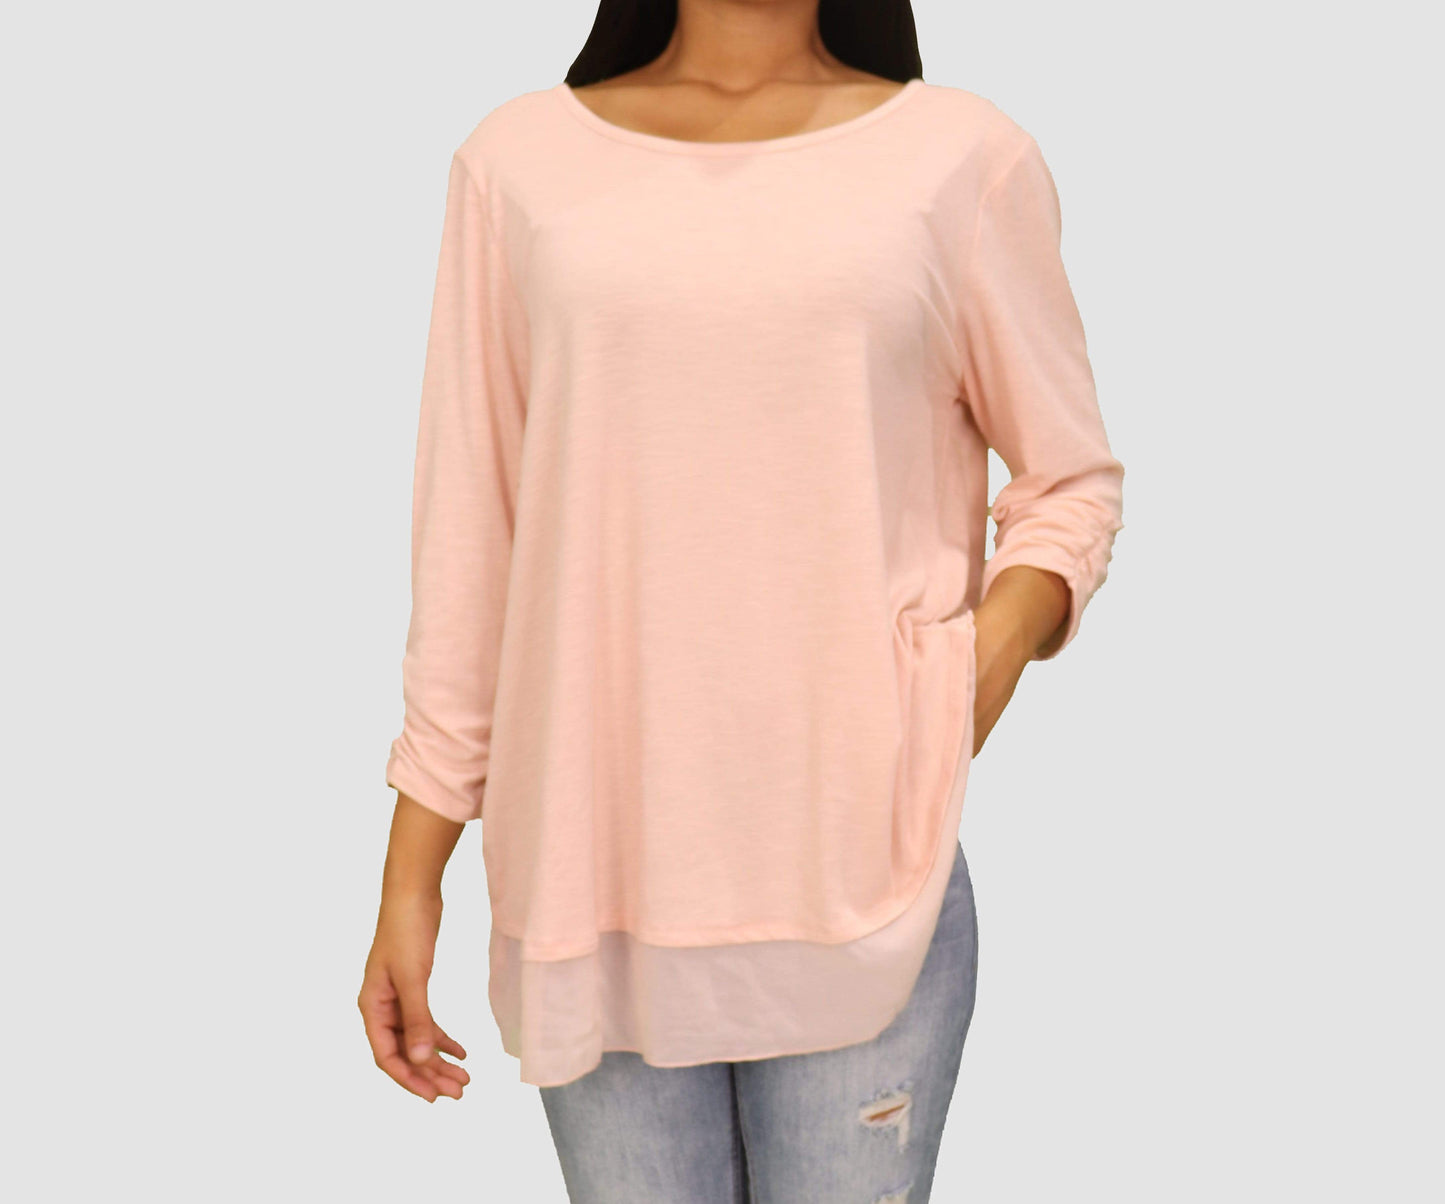 Style & Co Womens Tops XL / Pink Three Quarter Sleeve Top